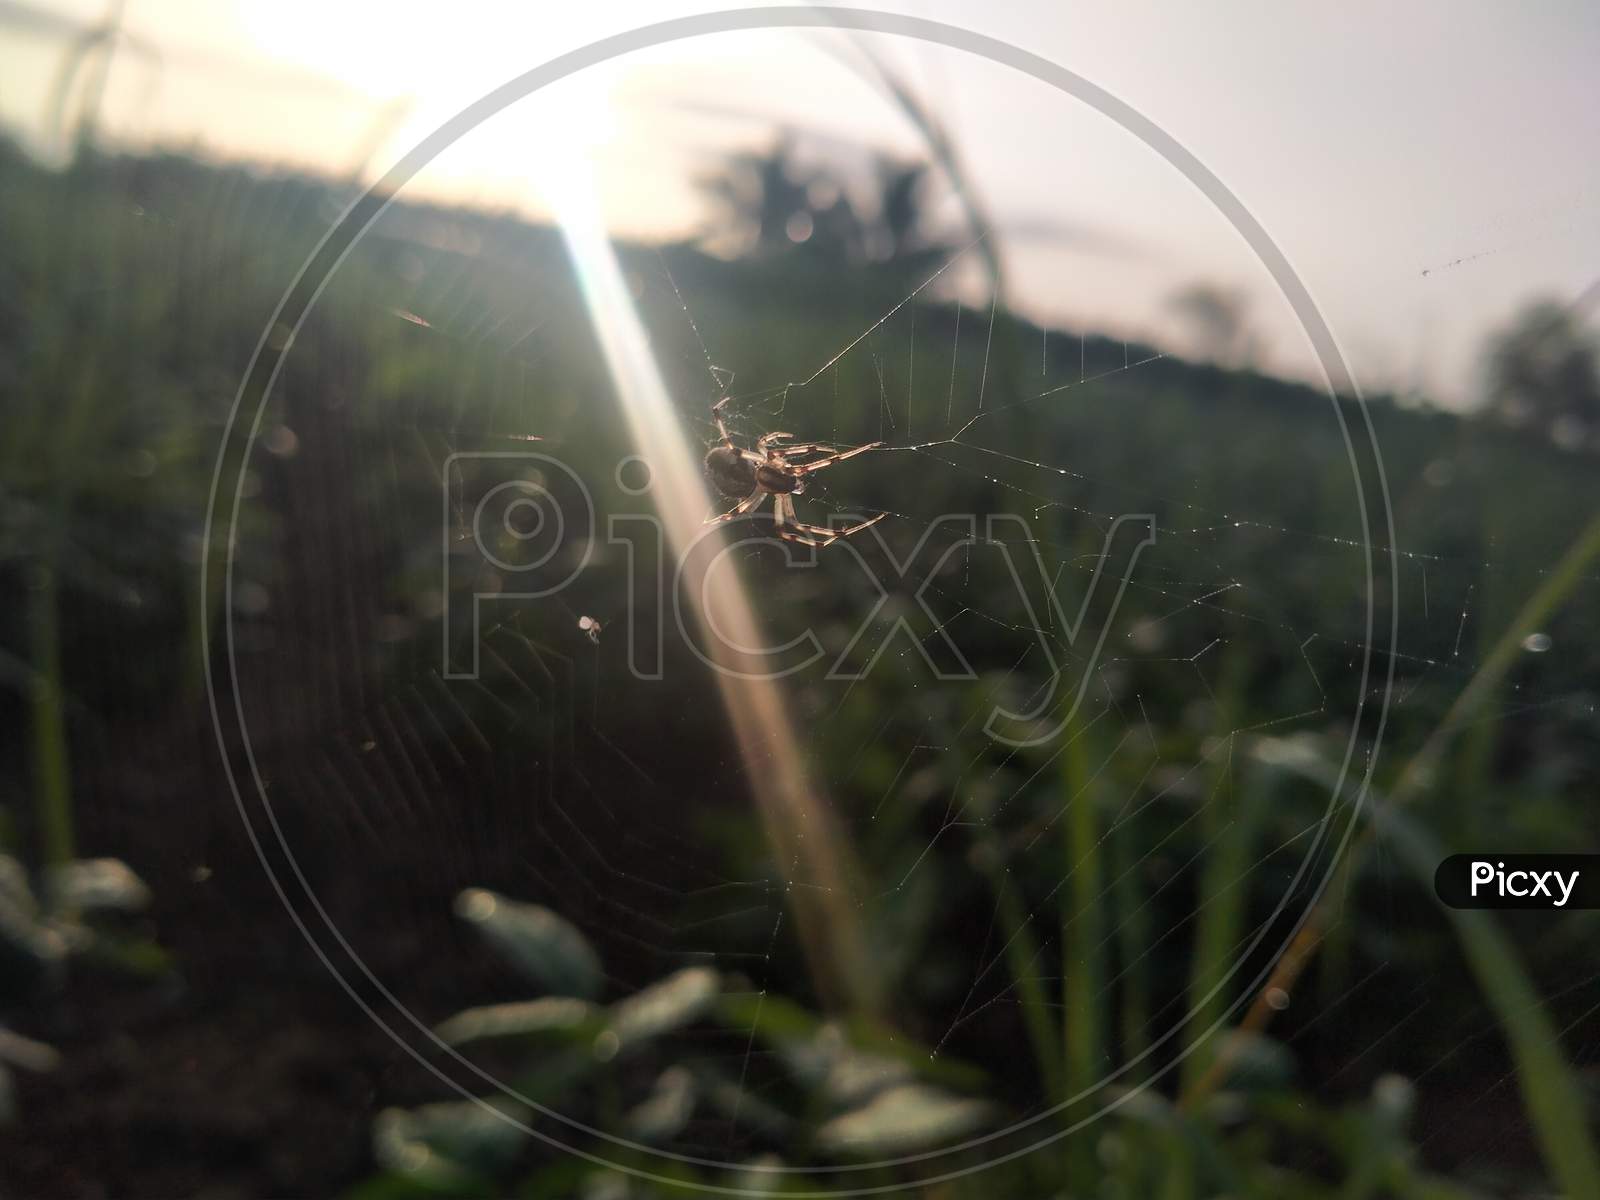 Spider on leaf in field photography.